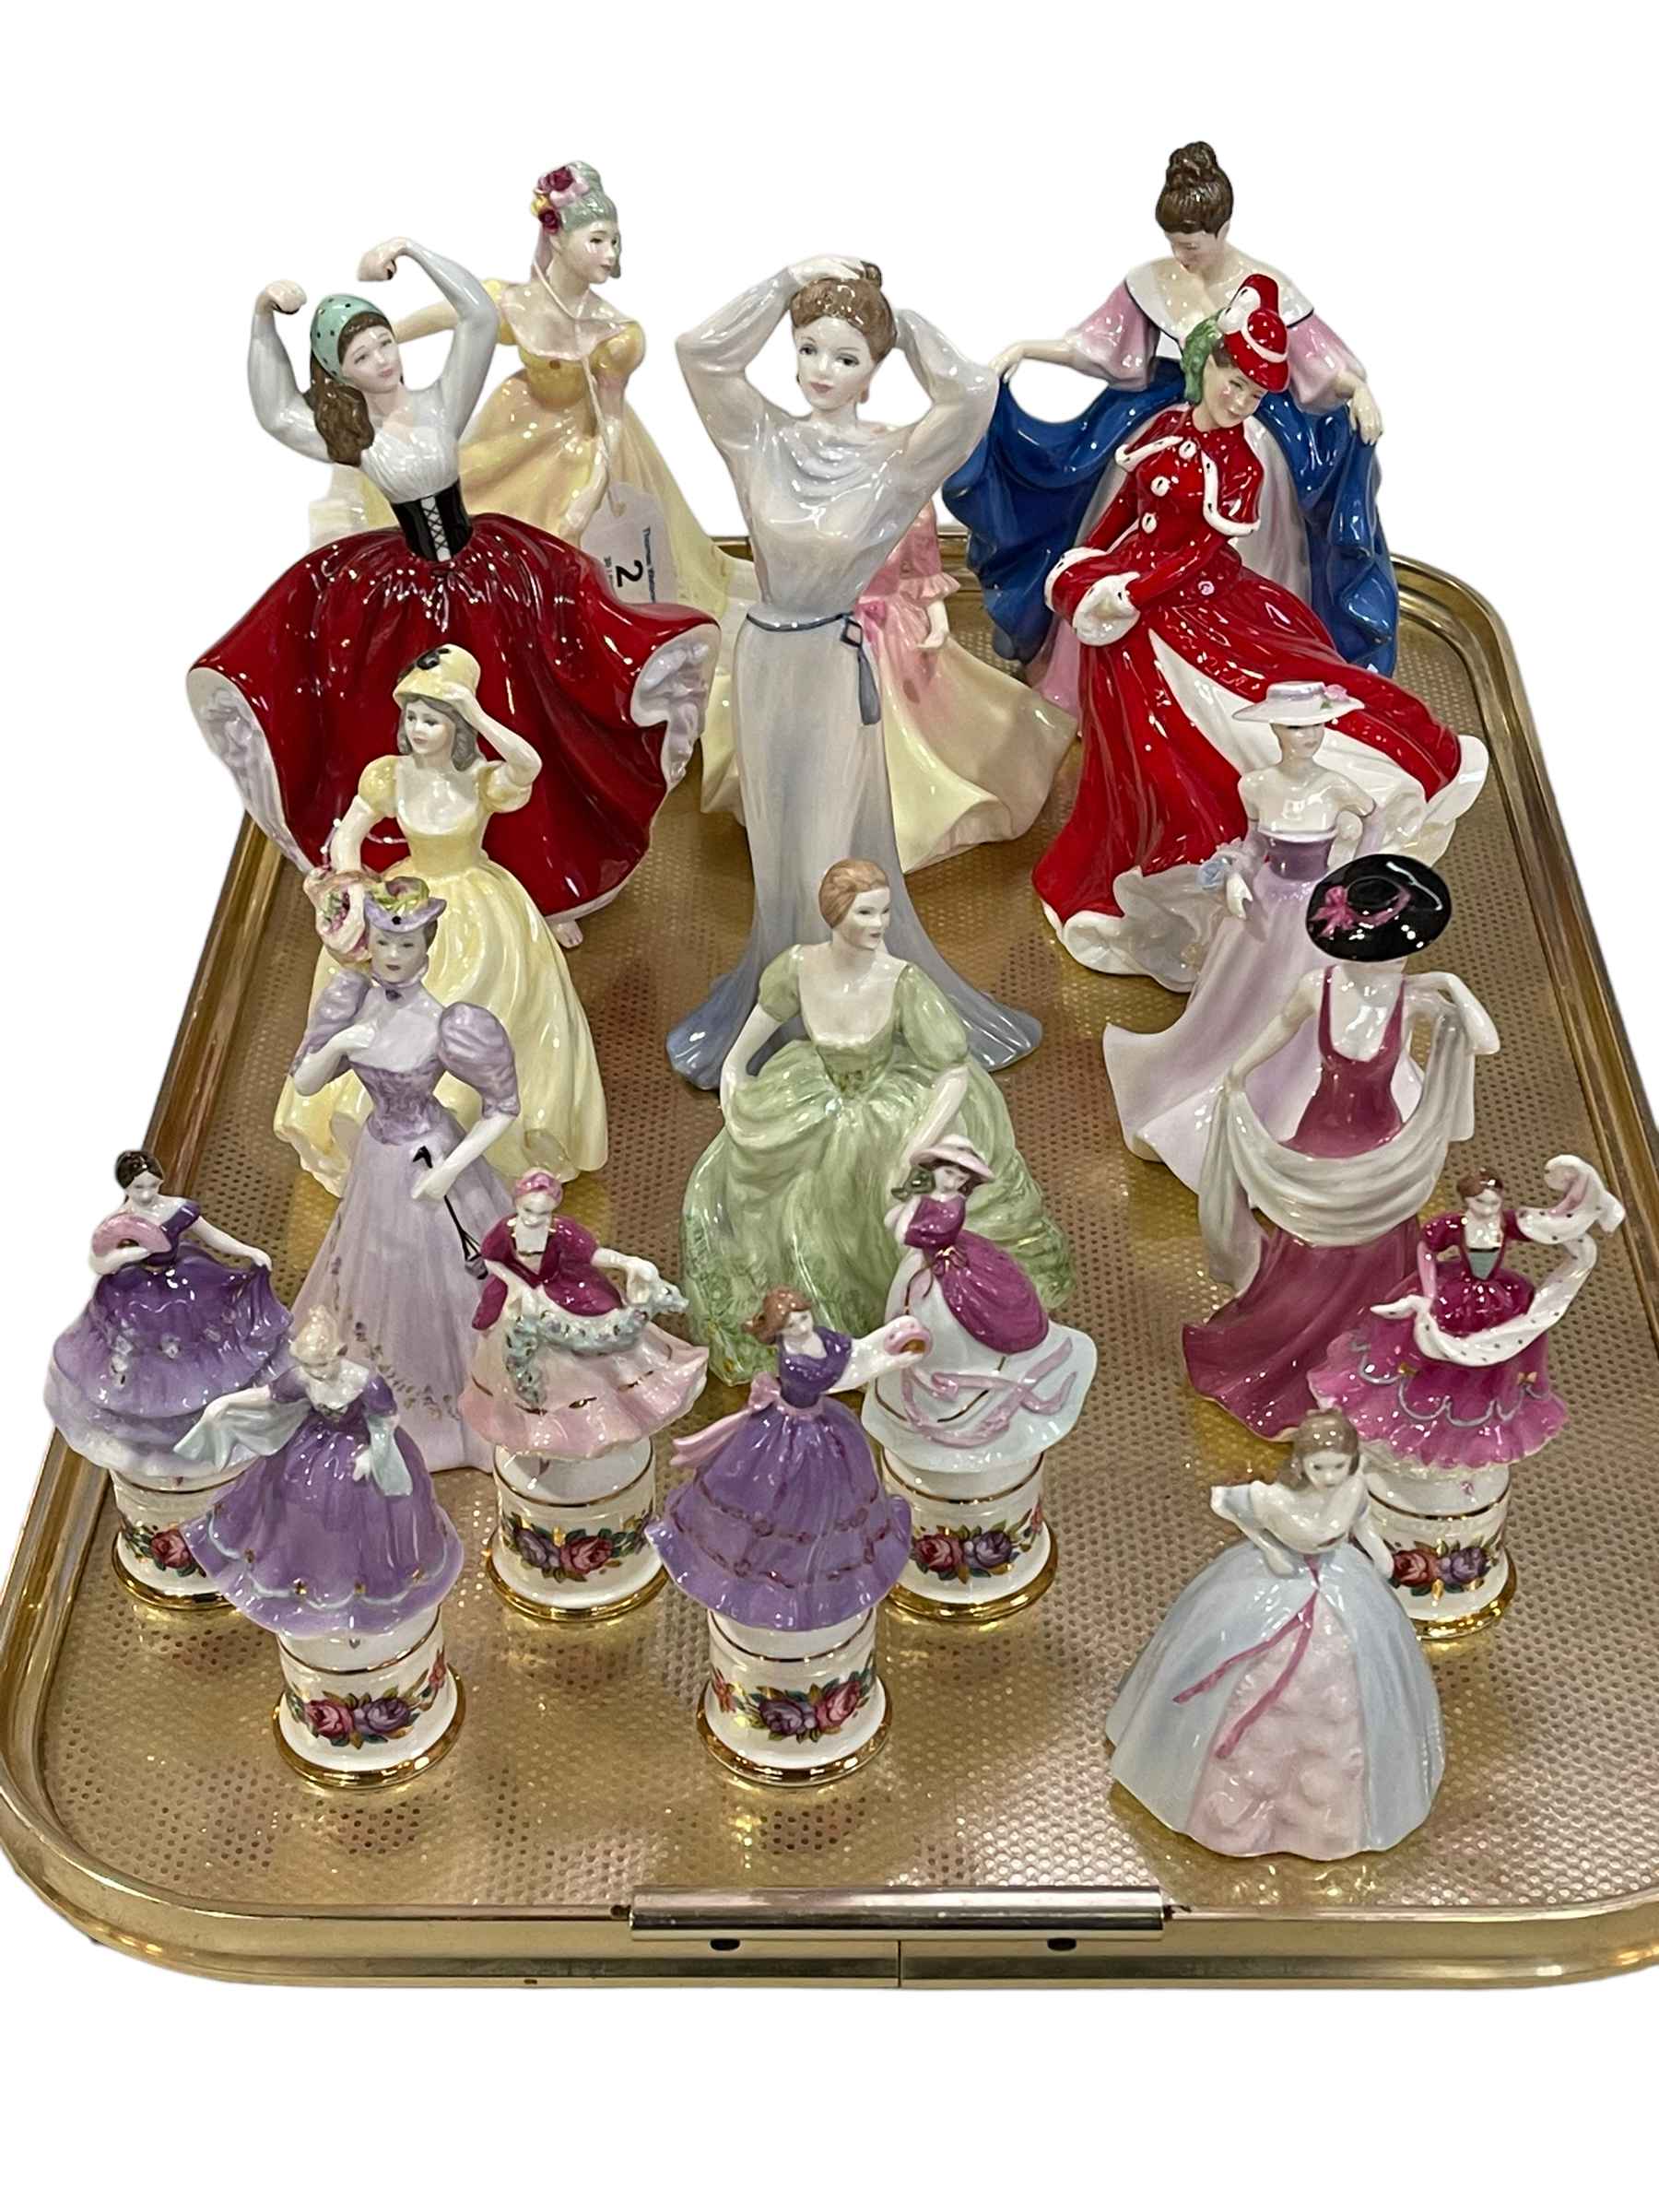 Collection of Coalport and Royal Doulton ladies including Sara, Yasmin, Ninette, etc.